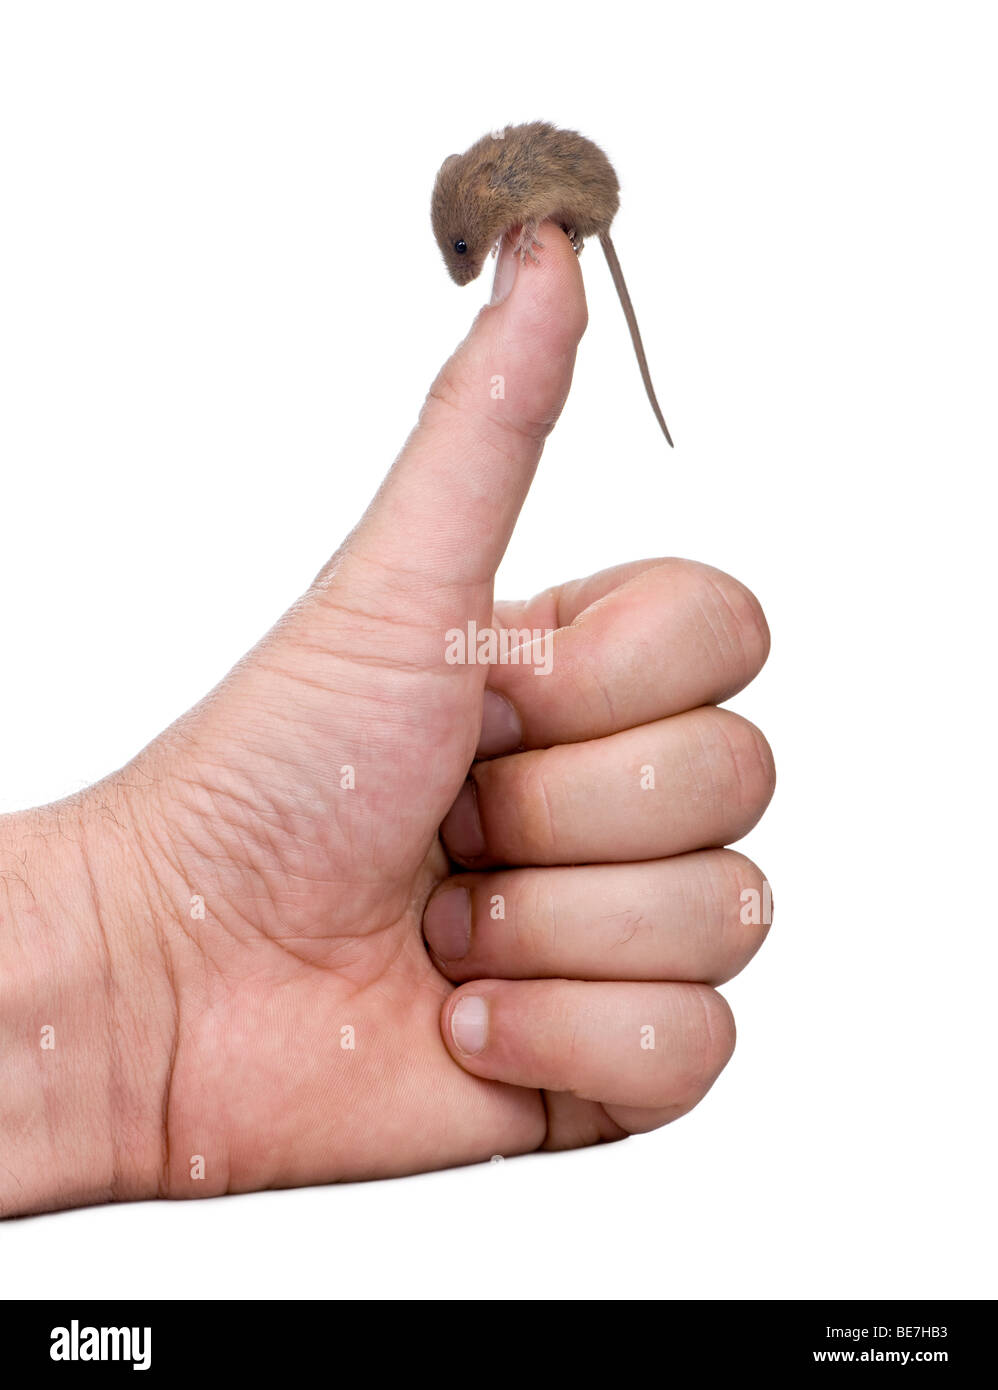 Harvest Mouse, Micromys minutus, perched on man's thumb, studio shot Stock Photo